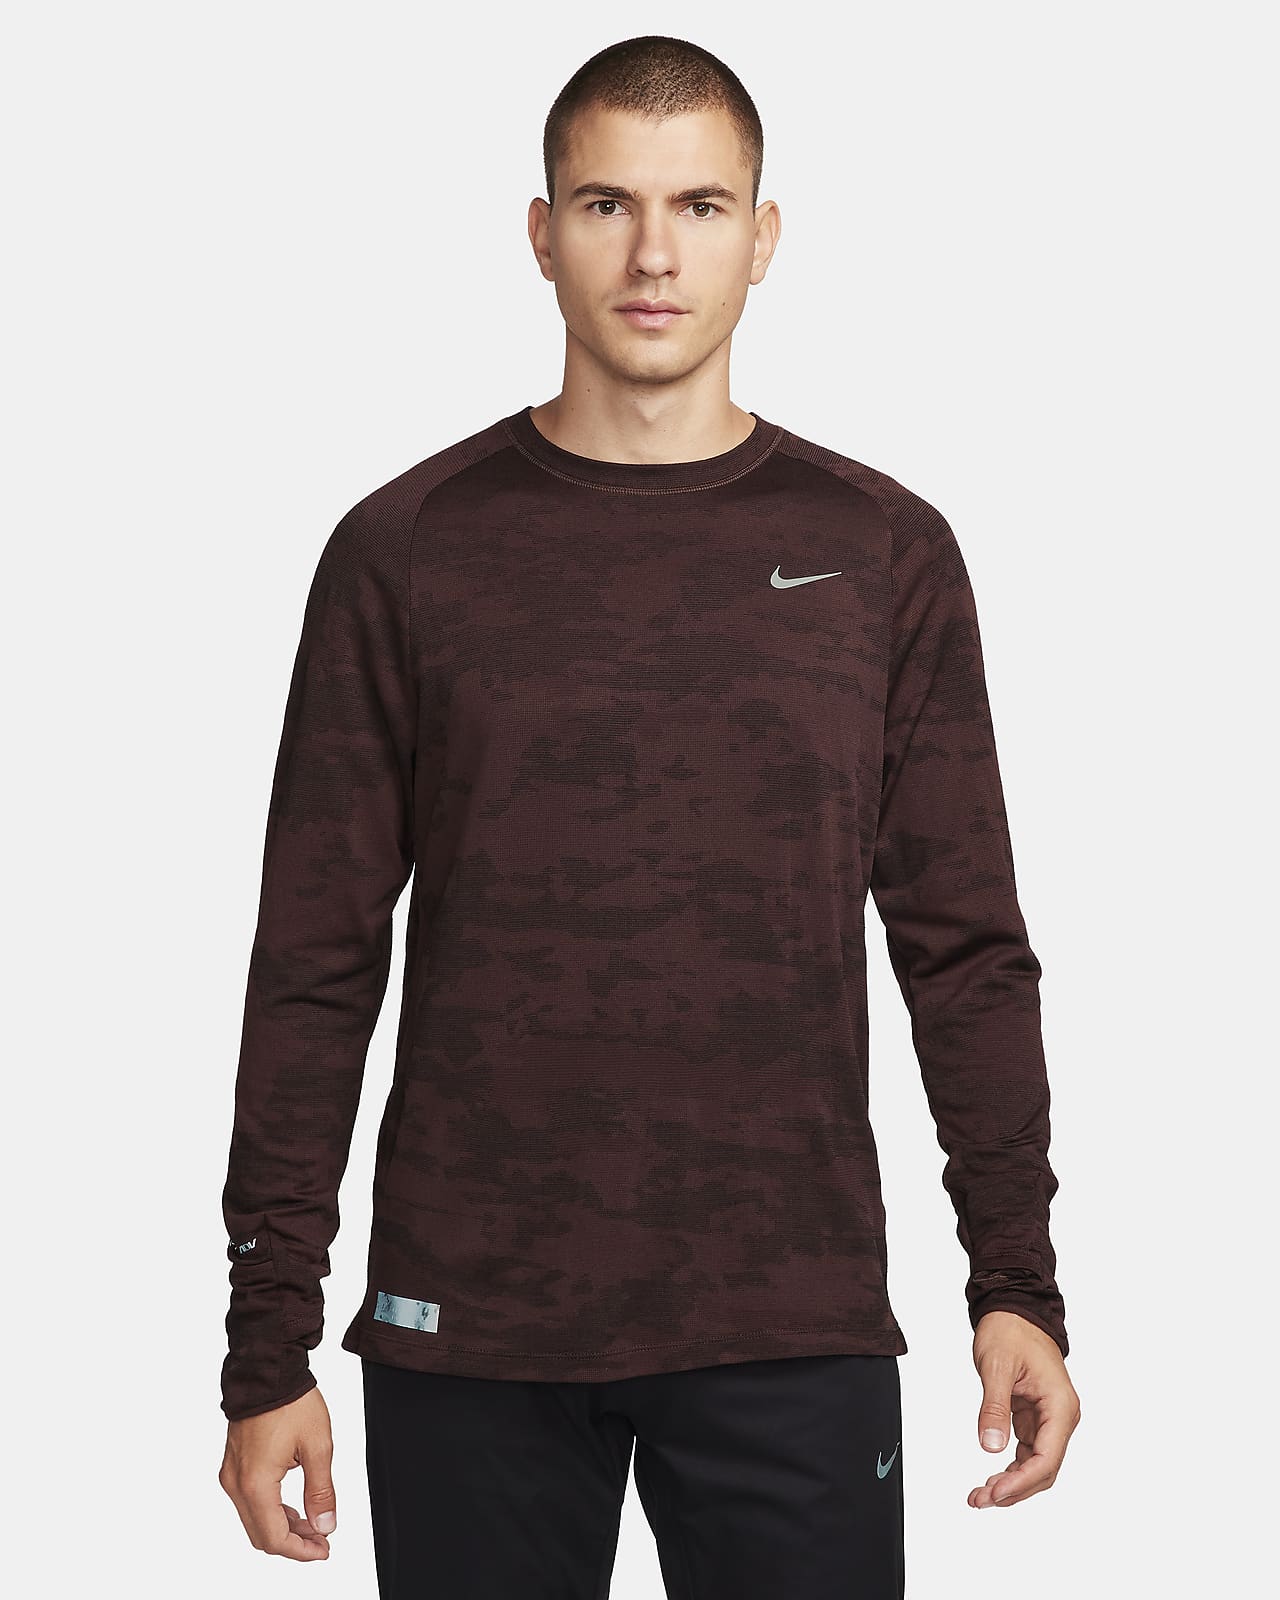 Haut de running à manches longues Nike Therma-FIT ADV Running Division pour homme